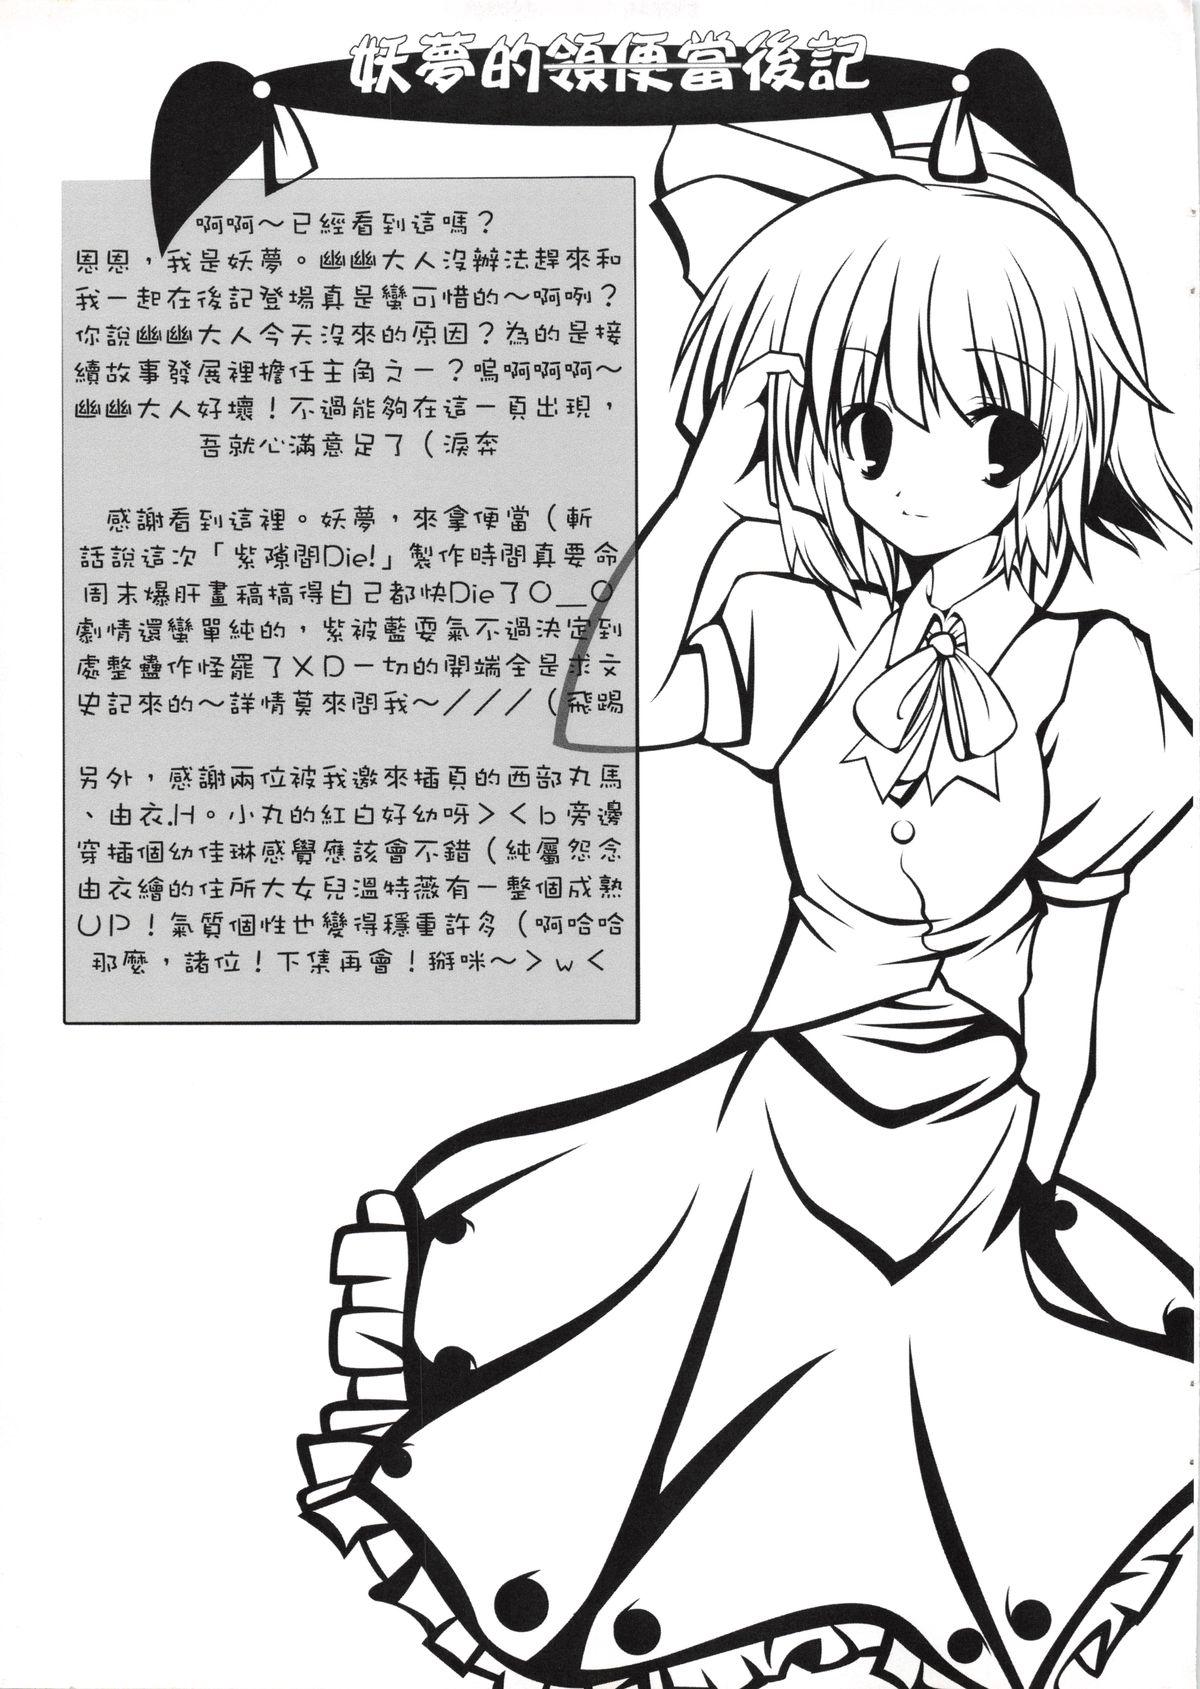 Clit 紫隙間Die! - Touhou project People Having Sex - Page 33